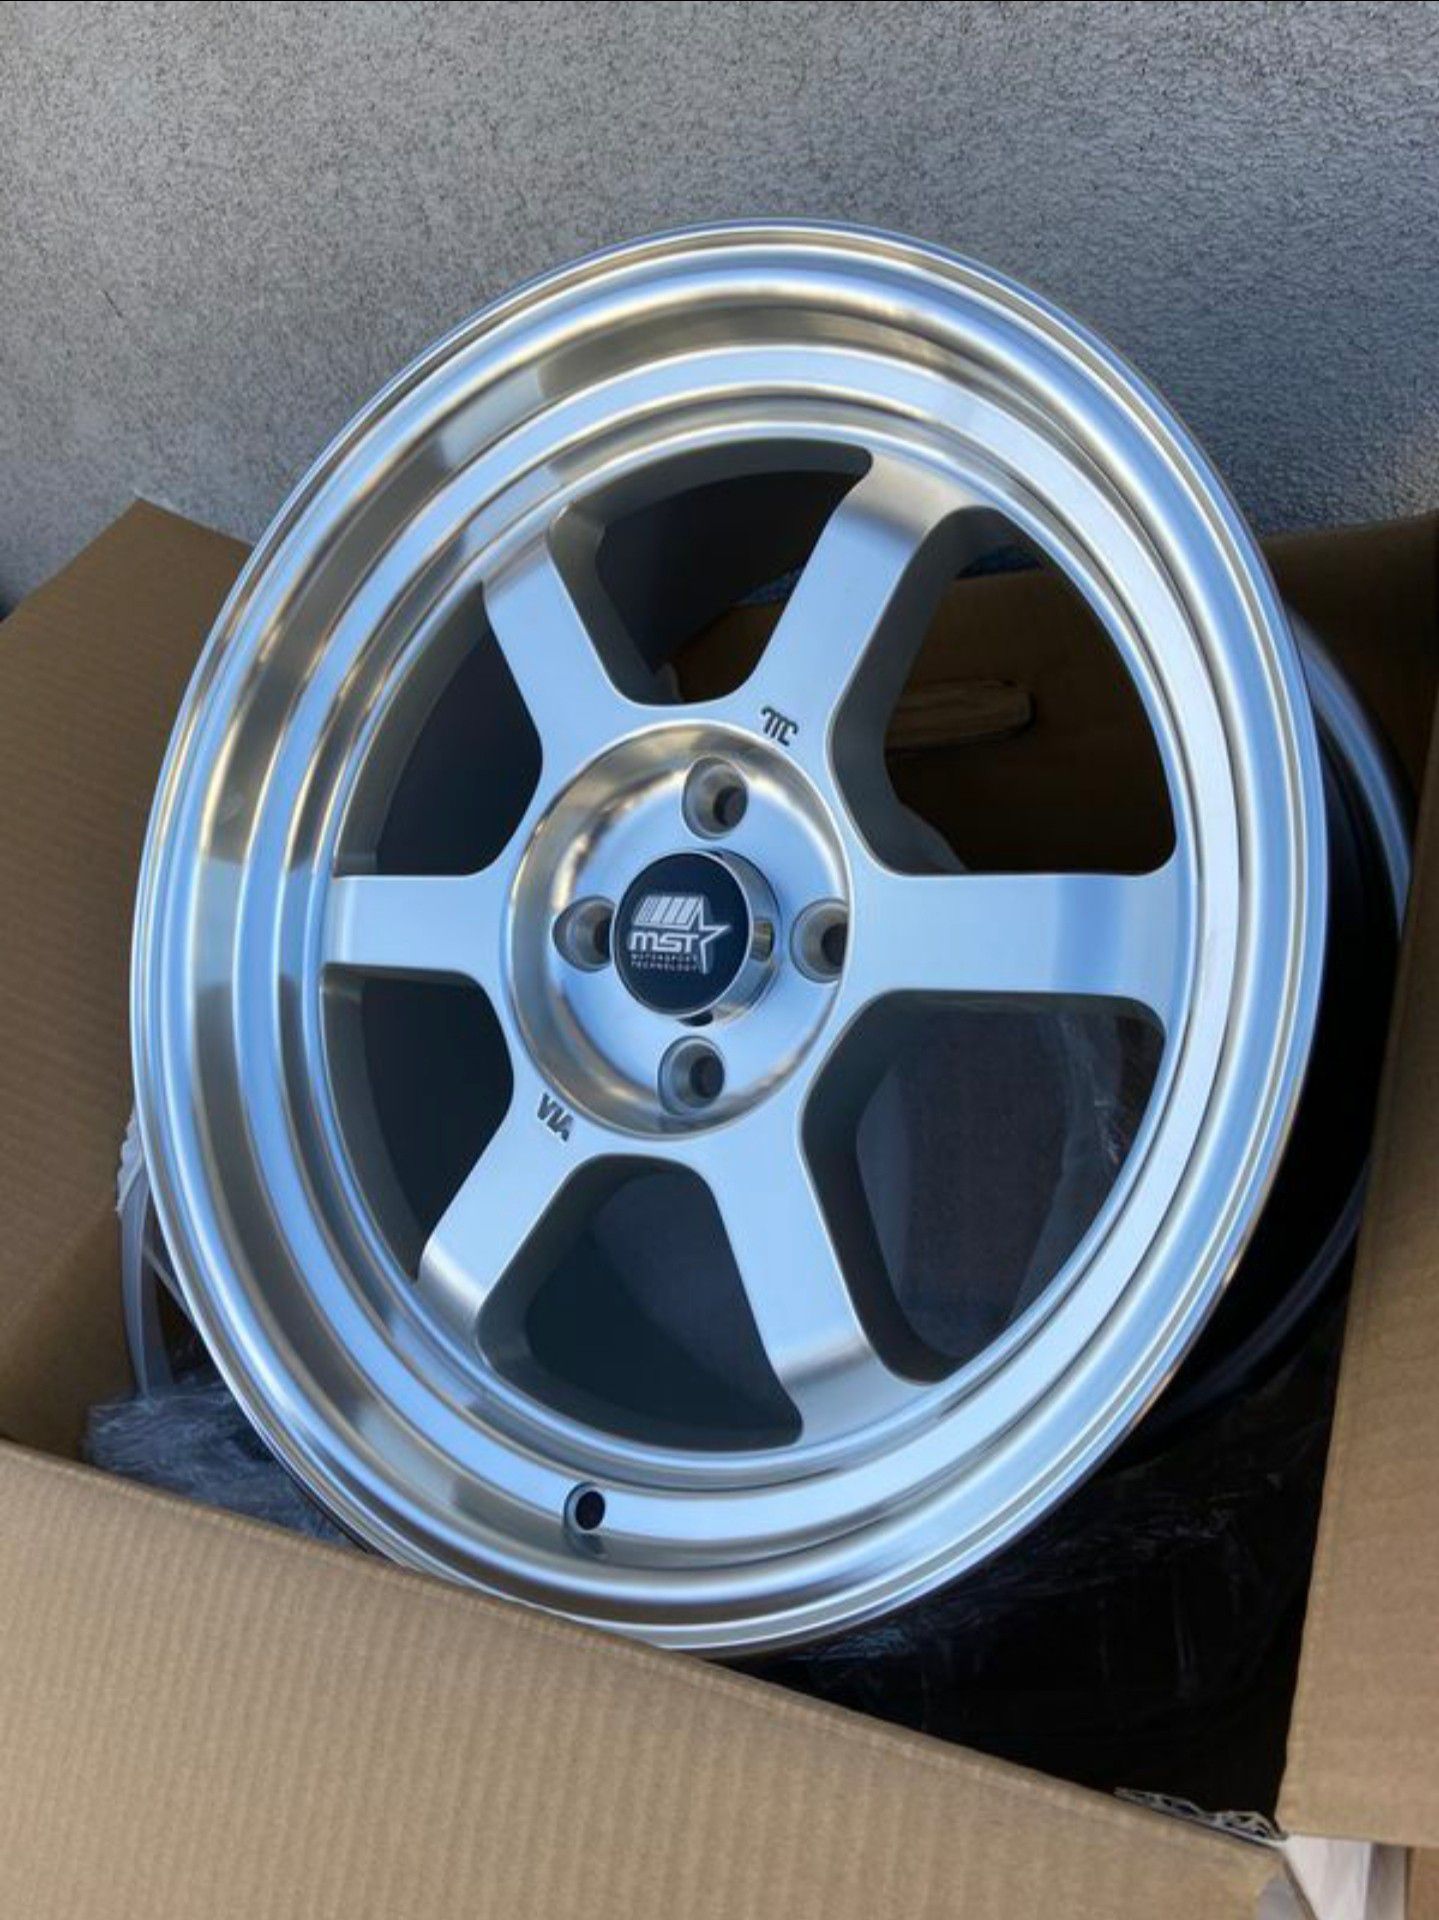 16" New Time Attack Wheels, Rims. 4x100